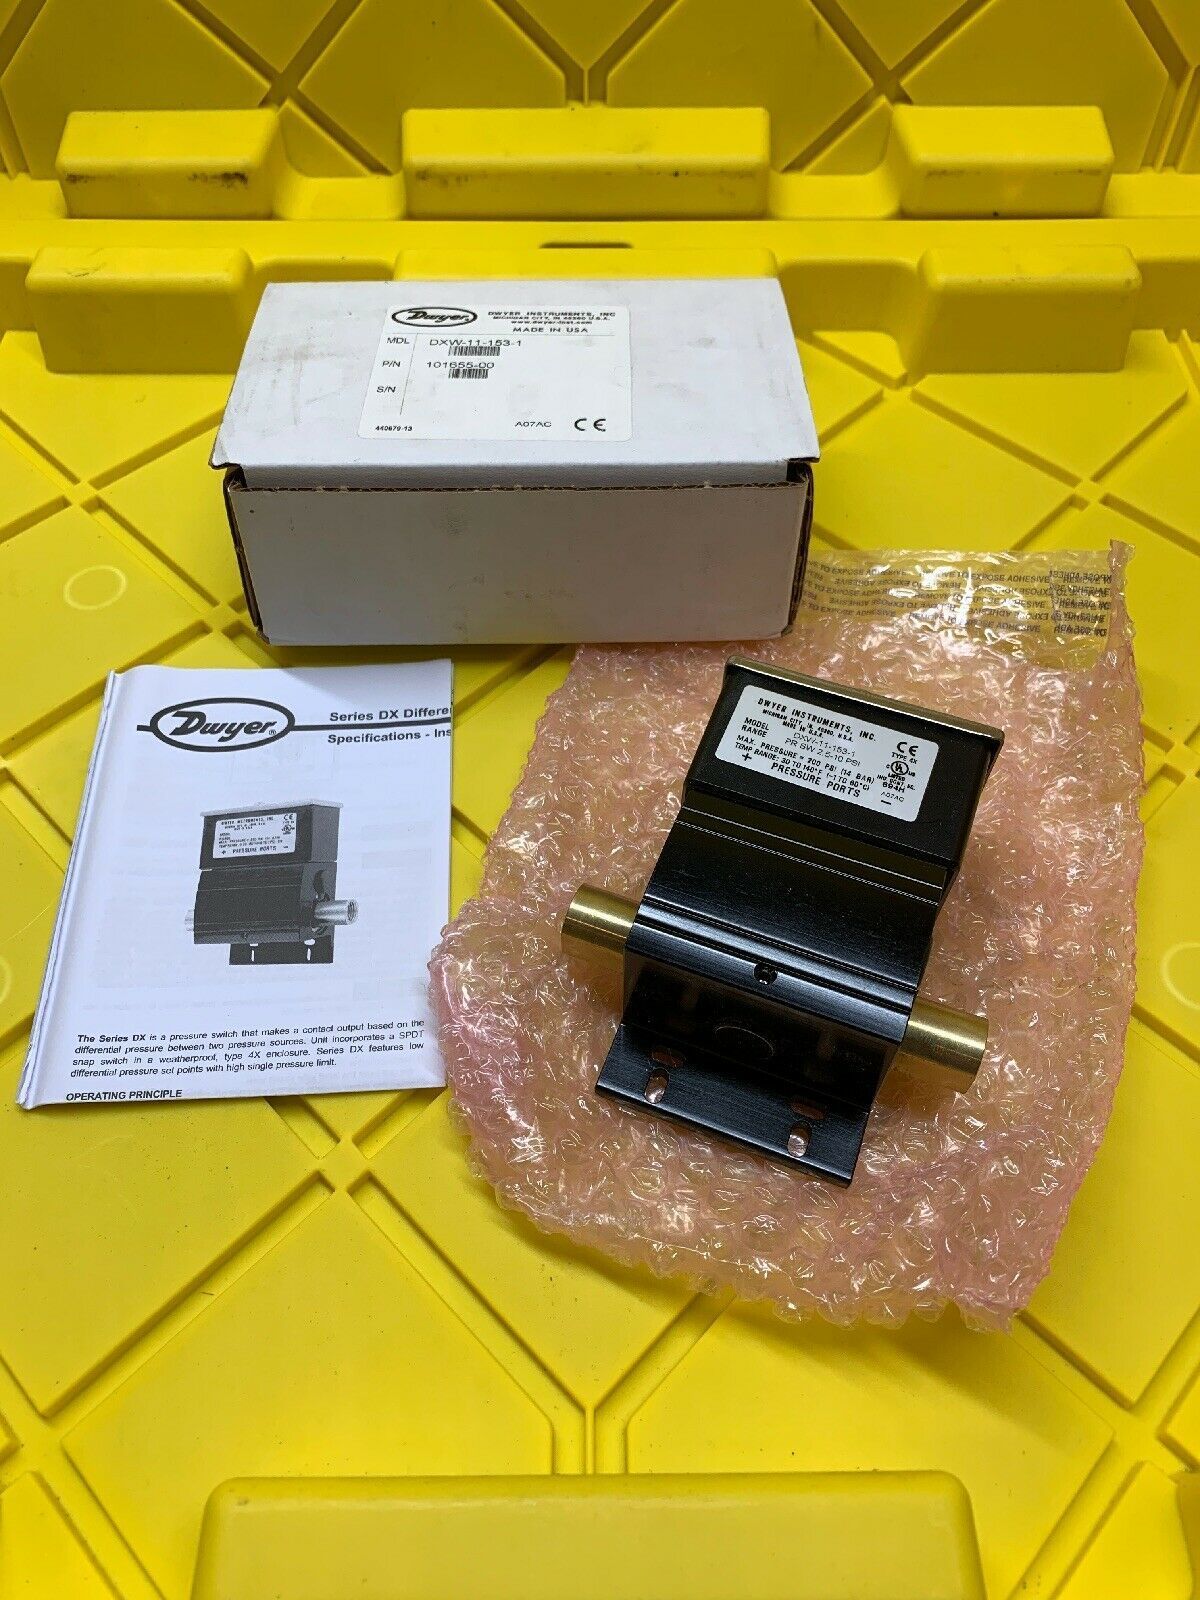 Dwyer DXW-11-153-4  Differential Pressure Switch